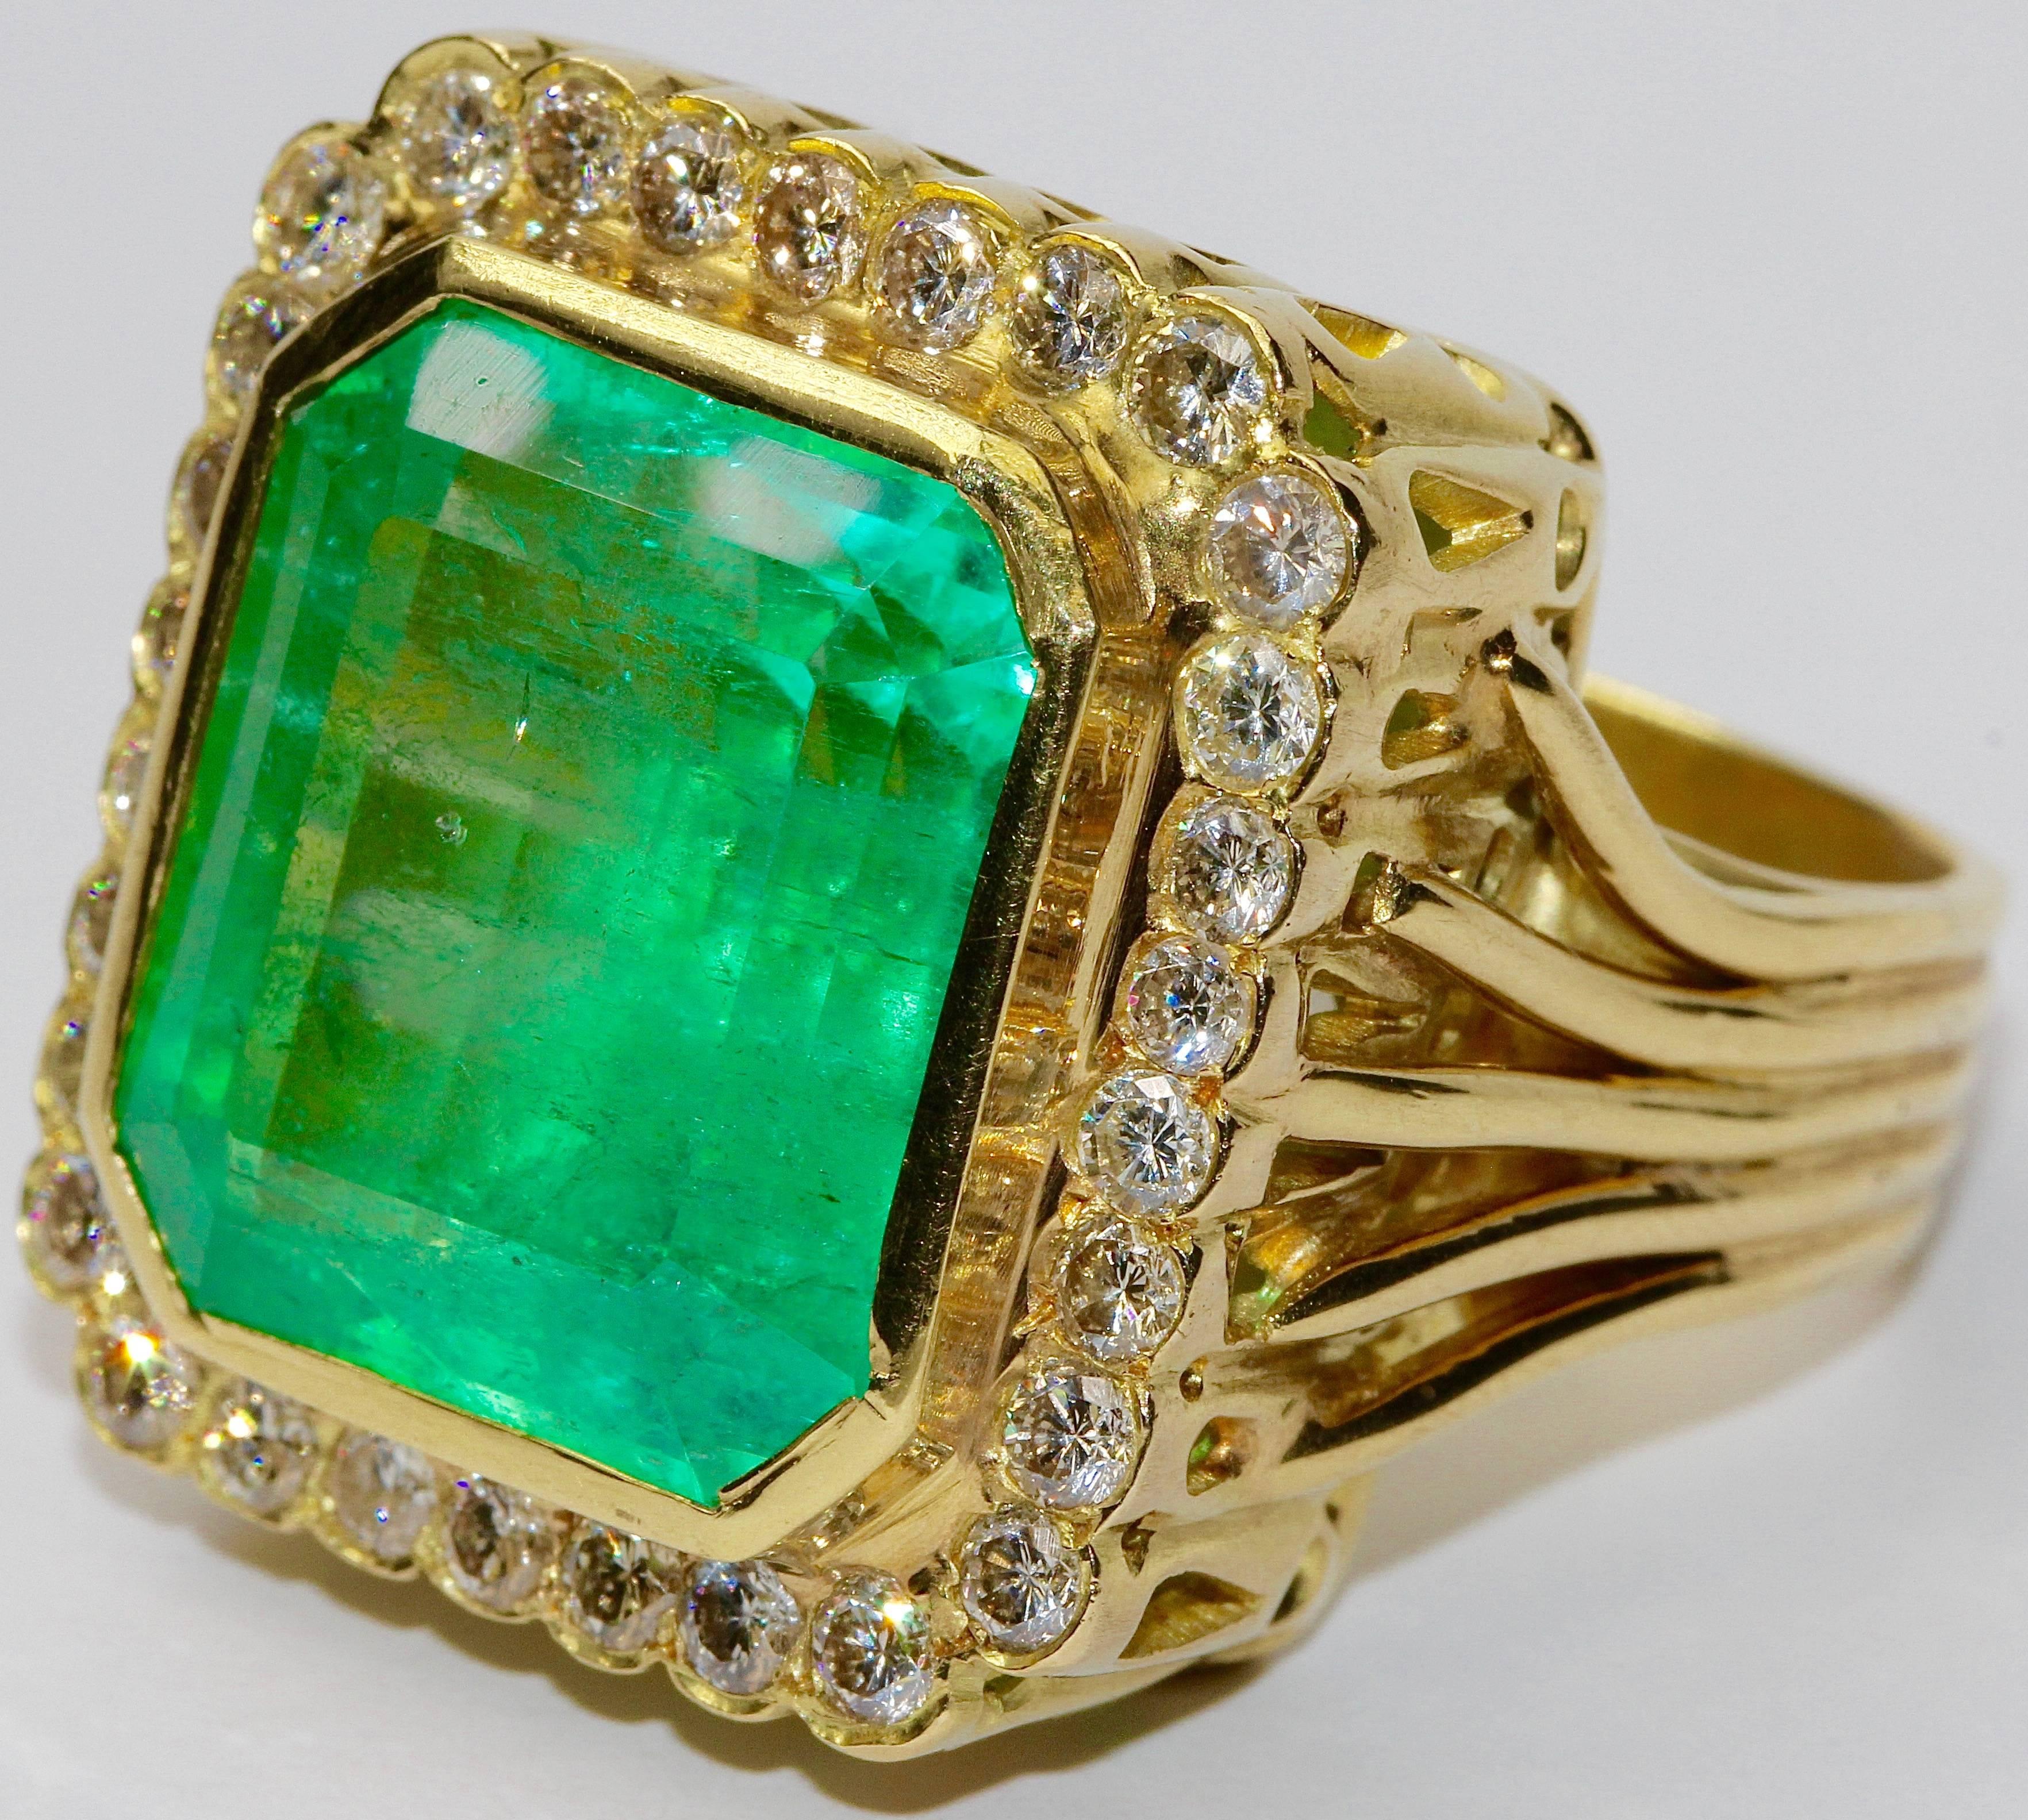 Extravagant and luxurious 18k gold ring with huge emerald. In addition, this dream ring is set with 30 diamonds of approx. 0.05 carat each.

The emerald has a weight of approx. 24 carats and a size of approx. 19 x 17 x 12 mm.
This is undoubtedly a